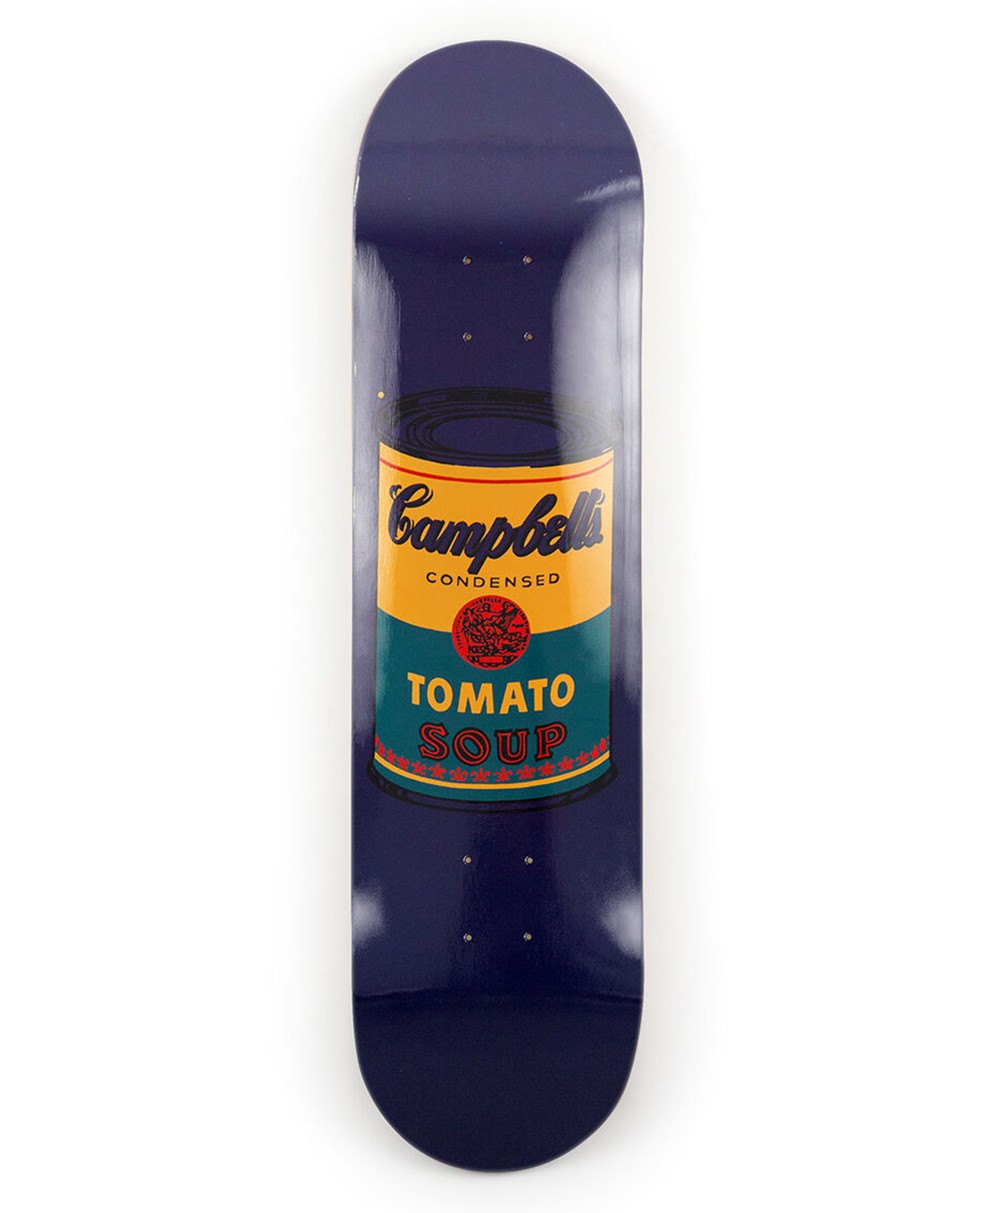 Produktbild "Campbell's Soup Teal" designed by Andy Warhol von The Skateroom im RAUM Conceptstore